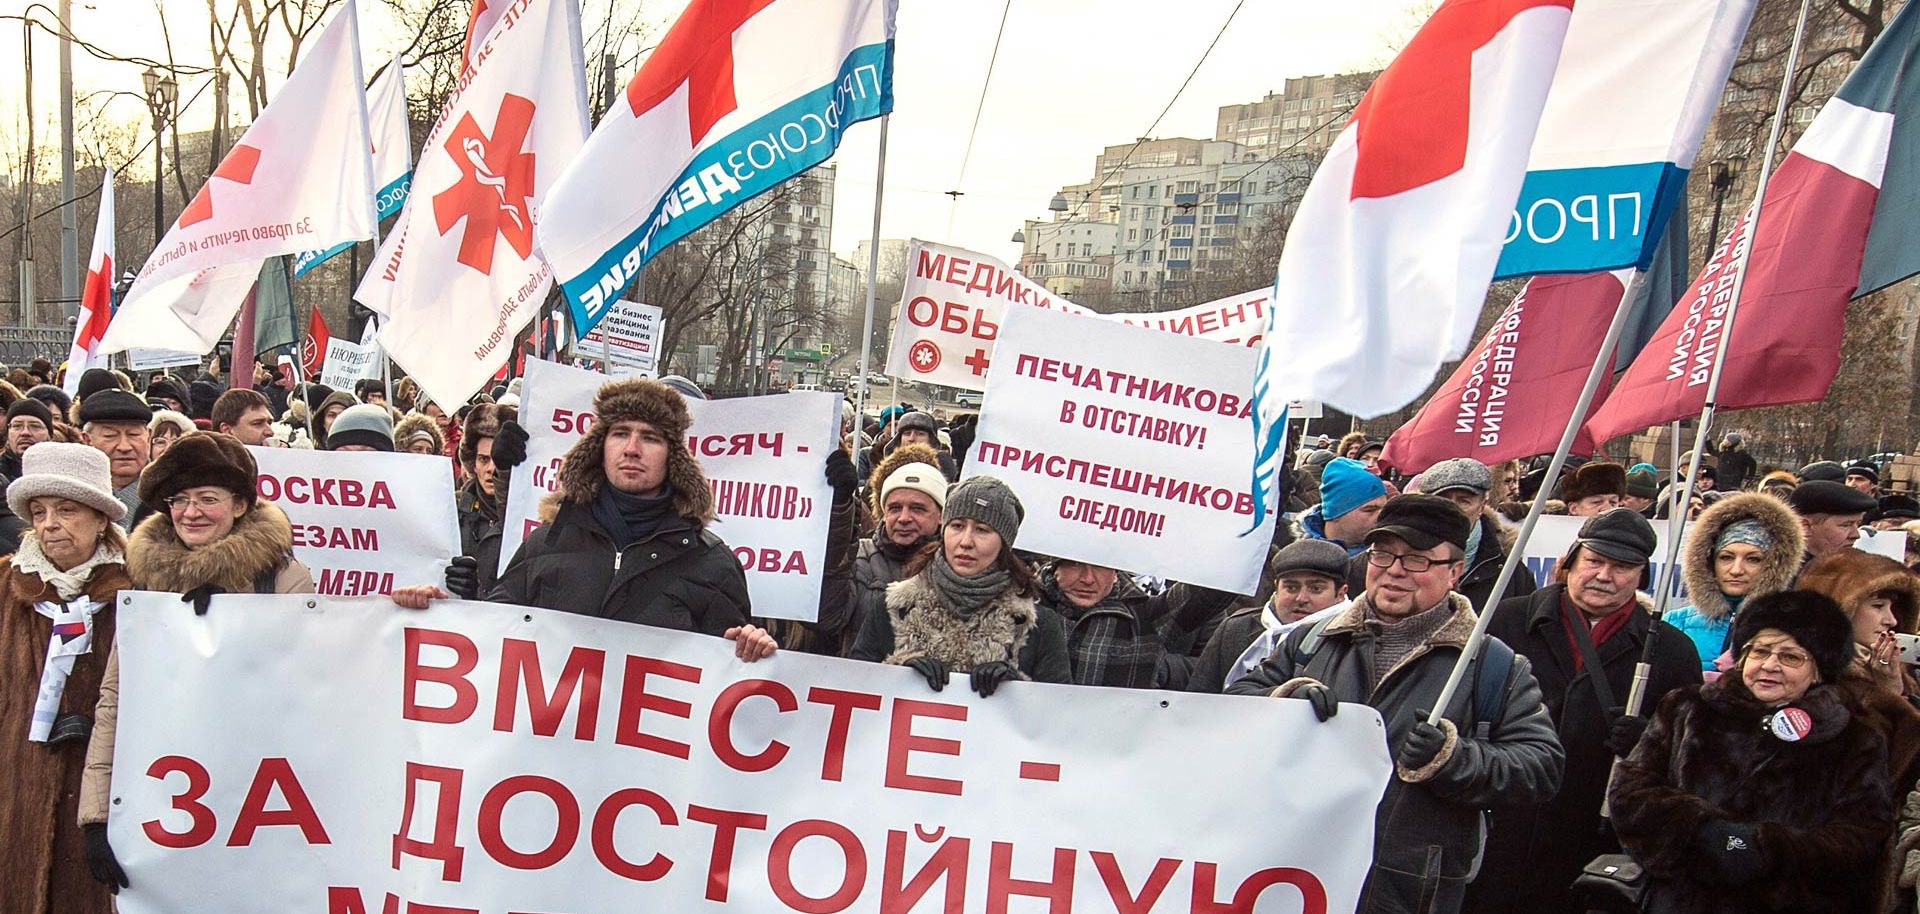 Amid an Economic Crisis, Russia Contains Dissent